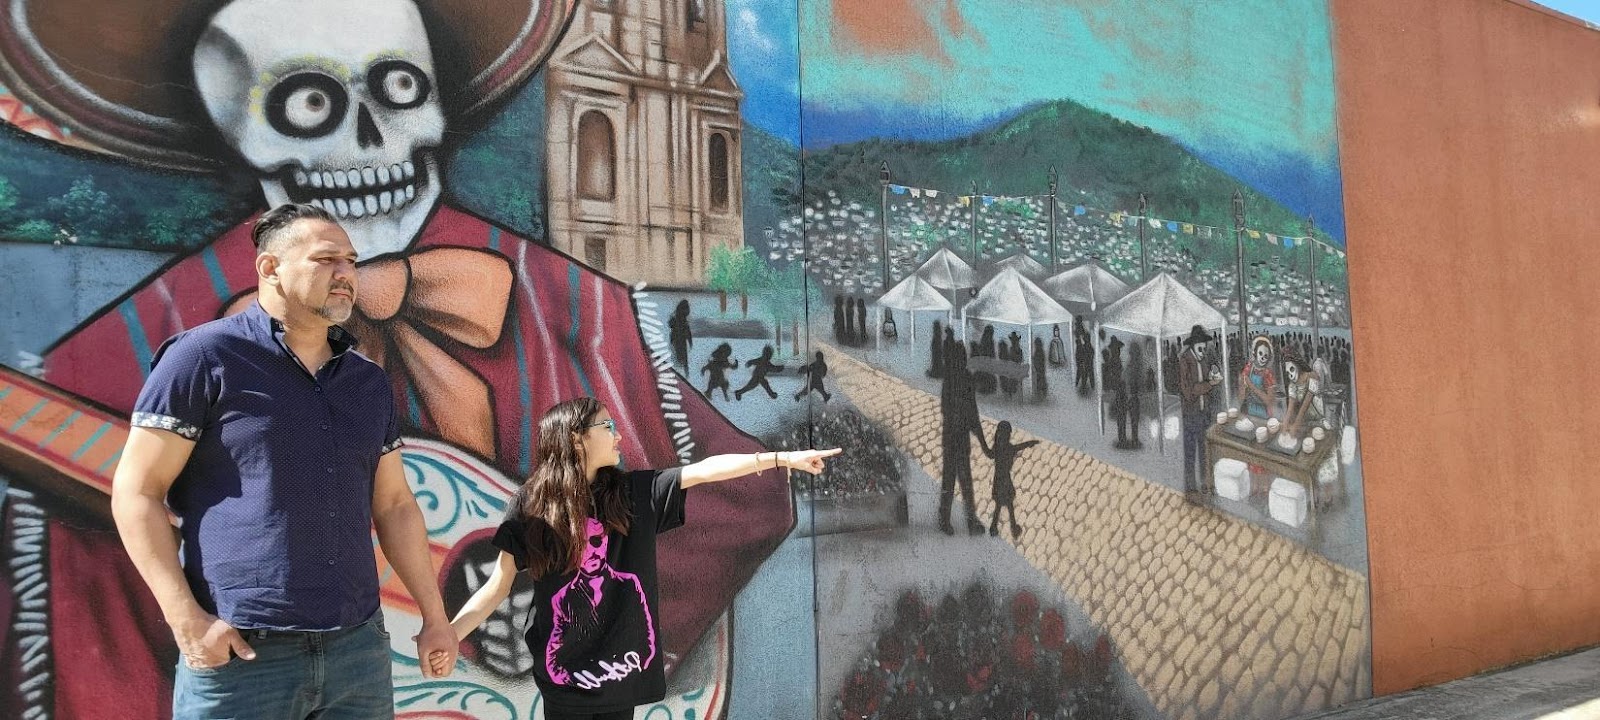 A person pointing at a mural

Description automatically generated